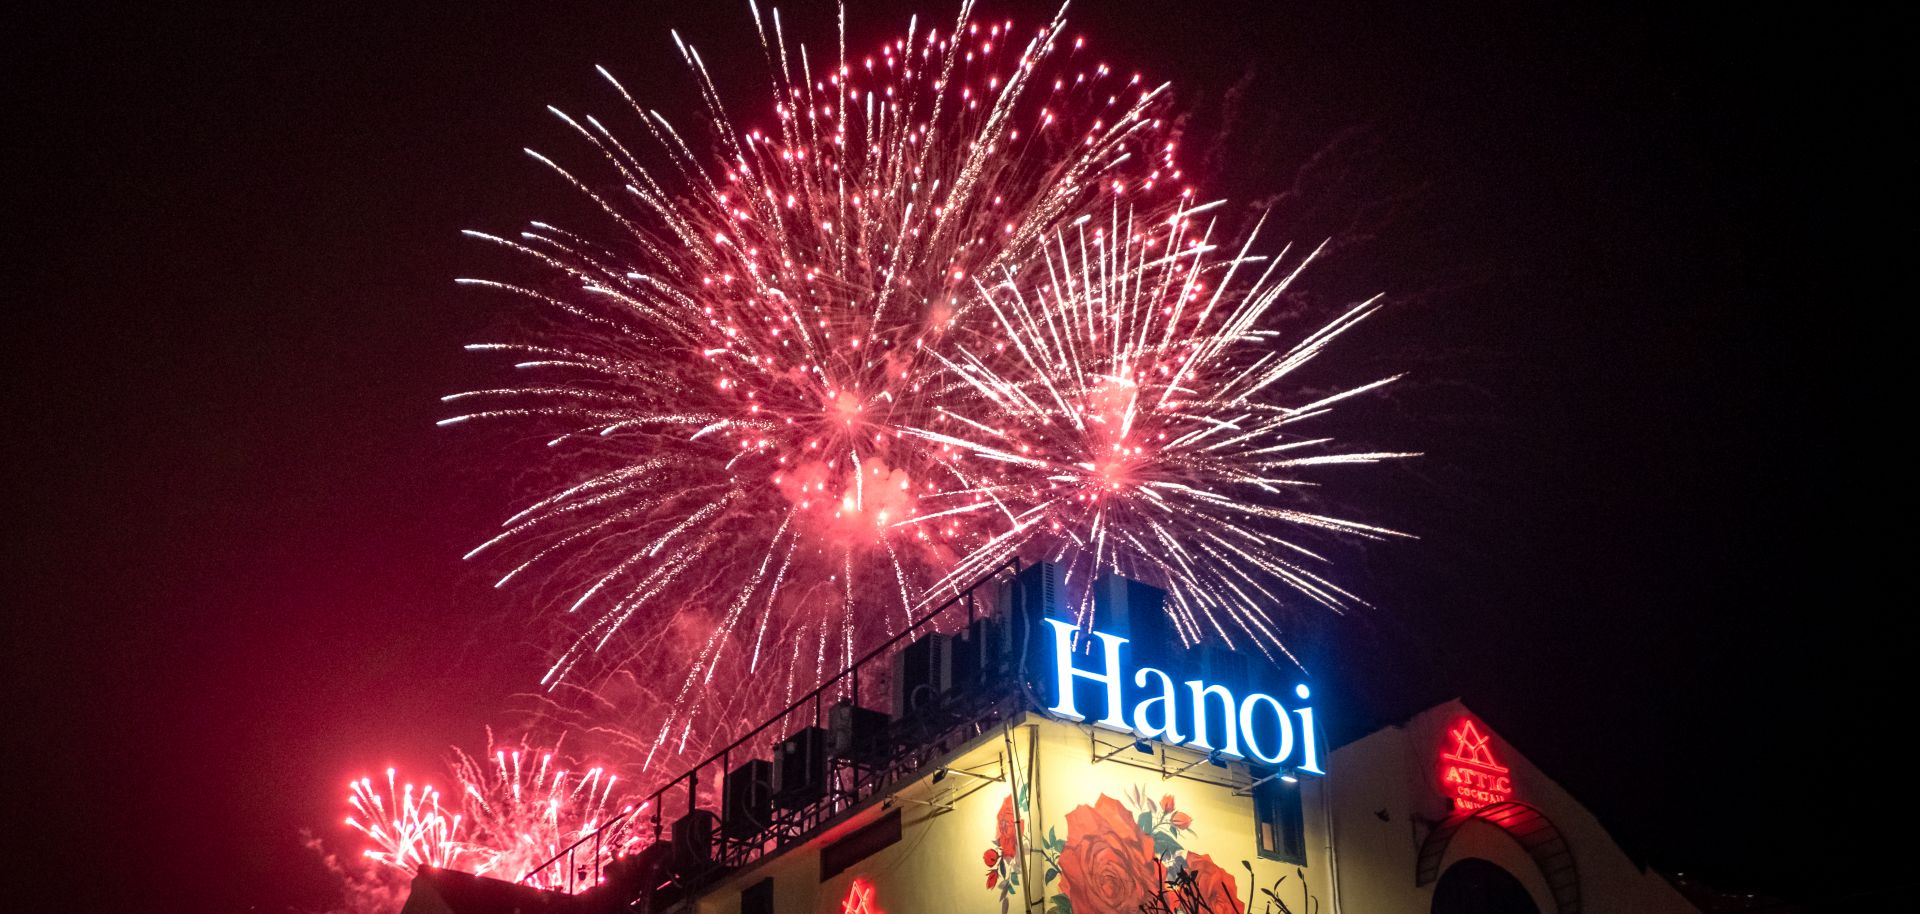 Vietnam rings in the new year with a fireworks show in the city center of Hanoi on Jan. 1, 2021. 